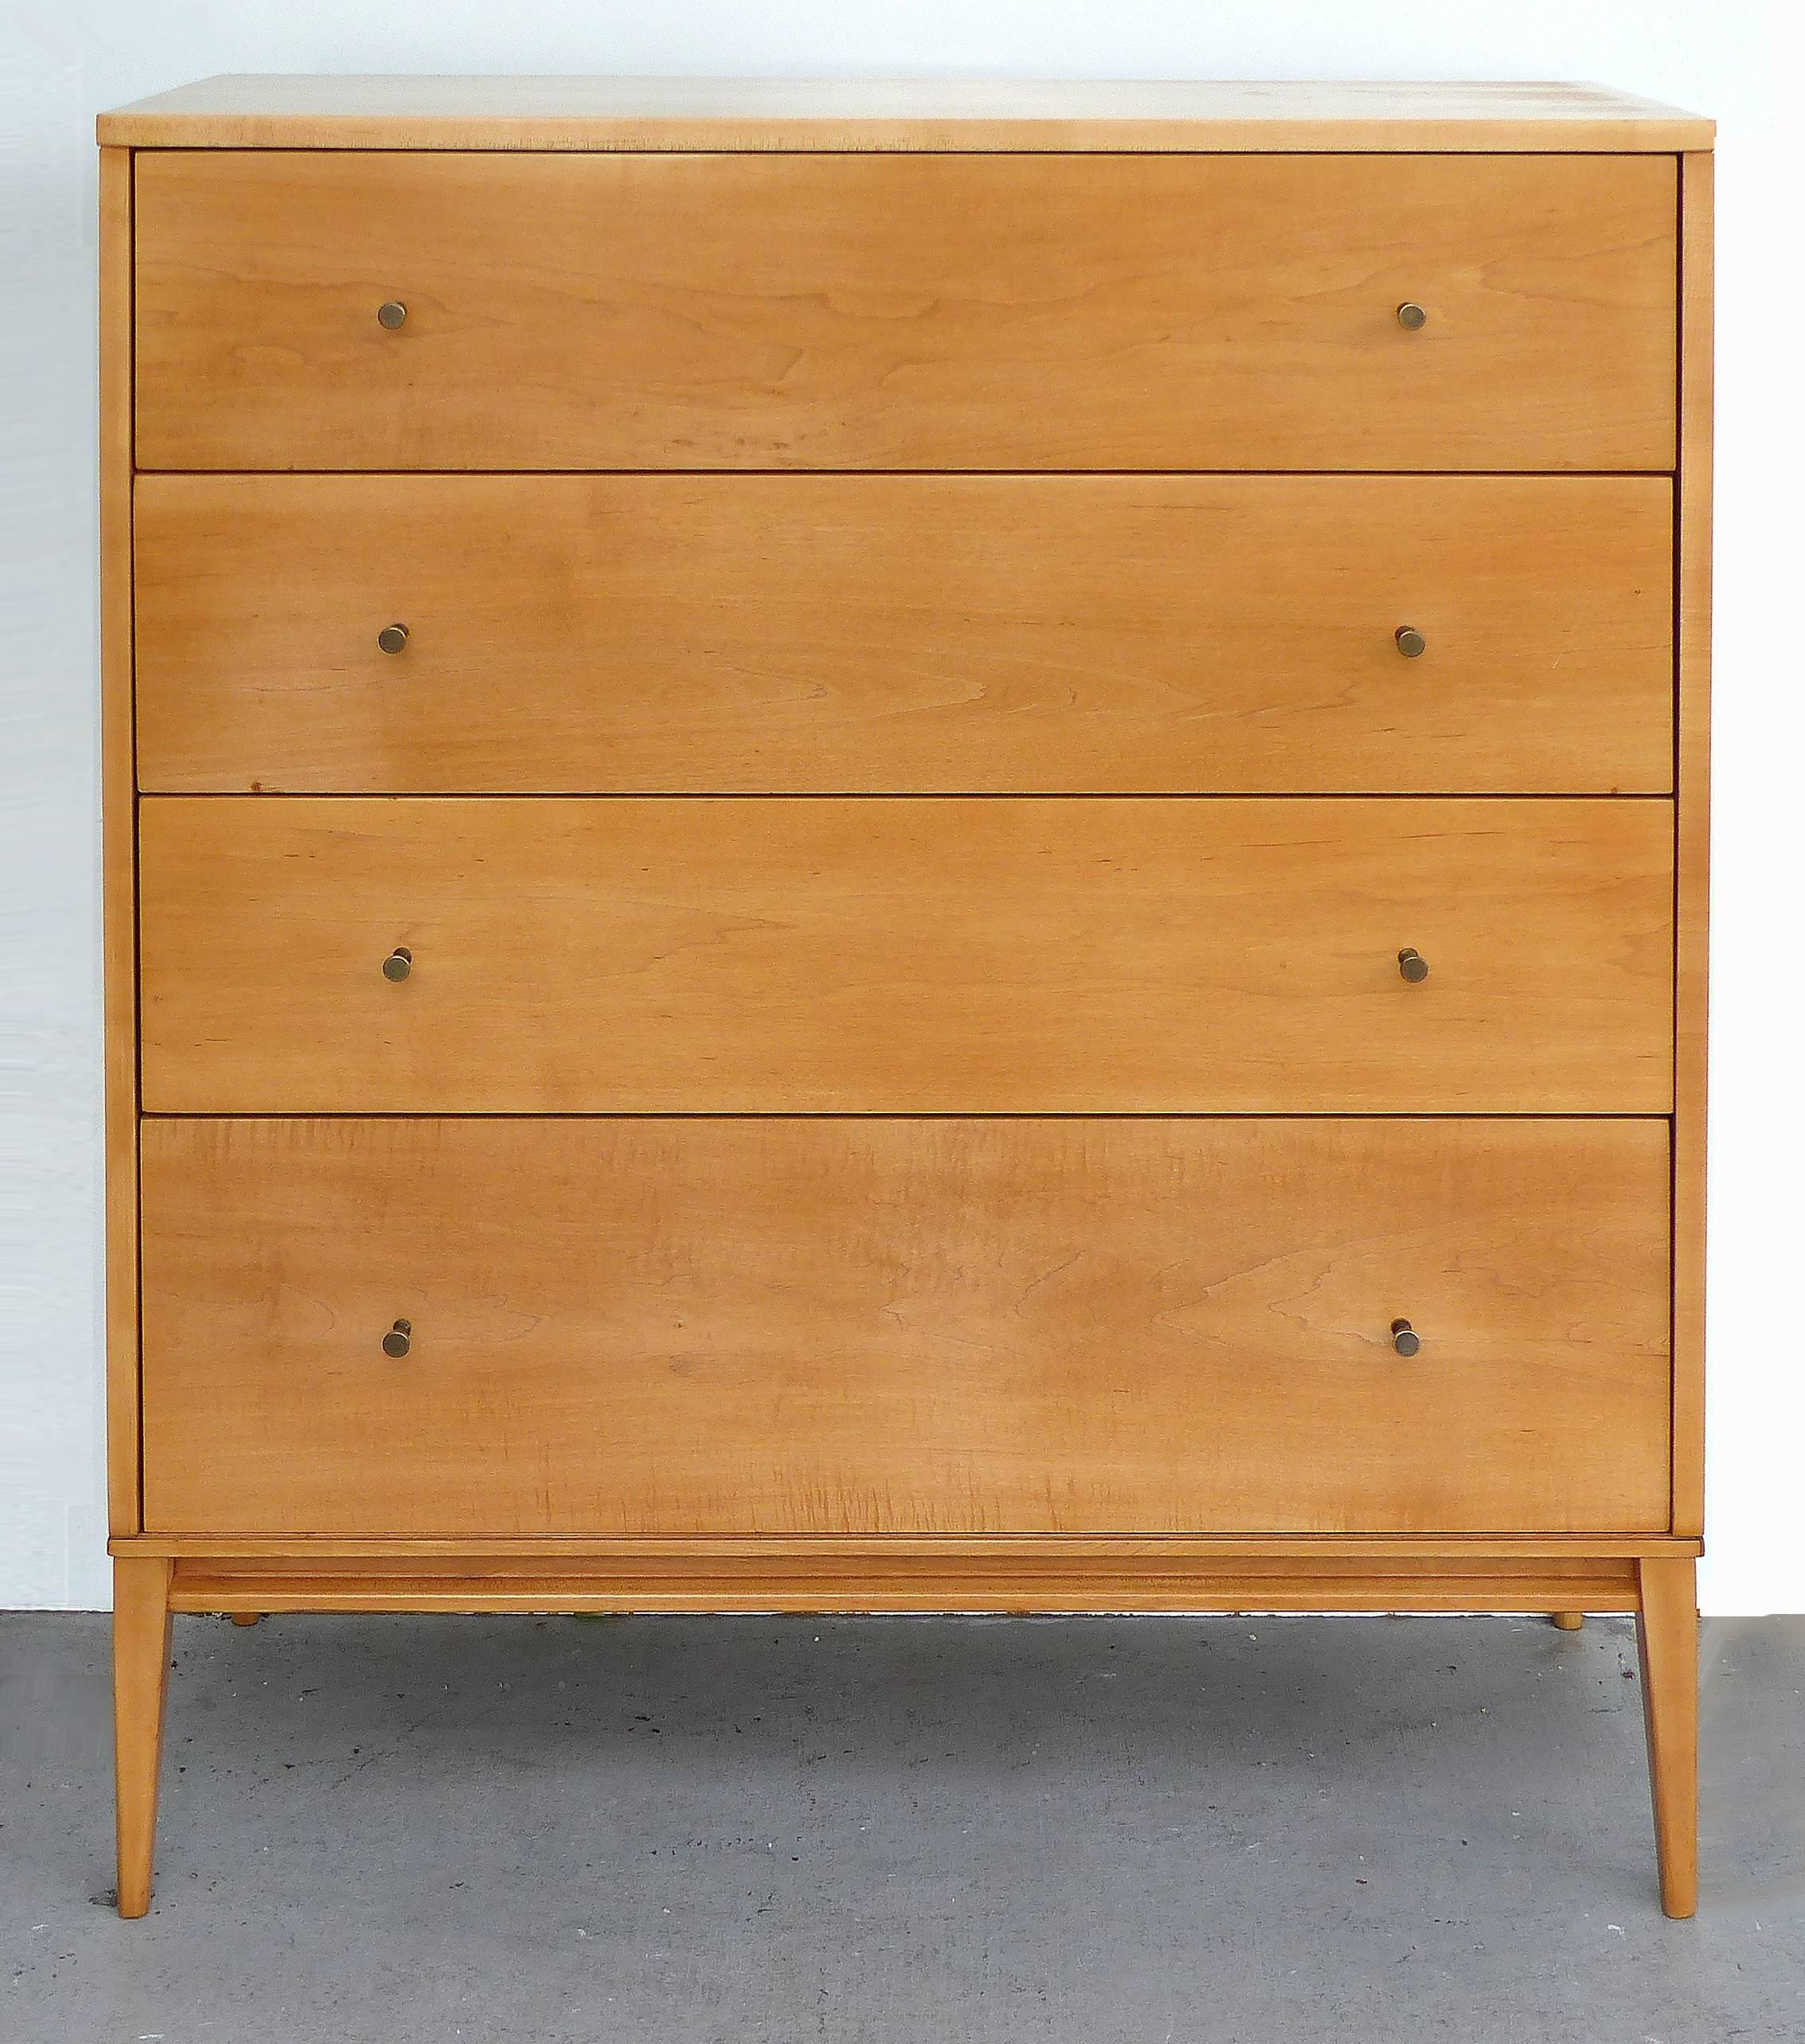 Offered is a tall chest of drawers by Paul McCobb (June 5, 1917 – March 10, 1969) for the Planner Group in maple with brass pulls.
The Planner Group, manufactured by Winchendon Furniture Company, was among the best selling contemporary furniture